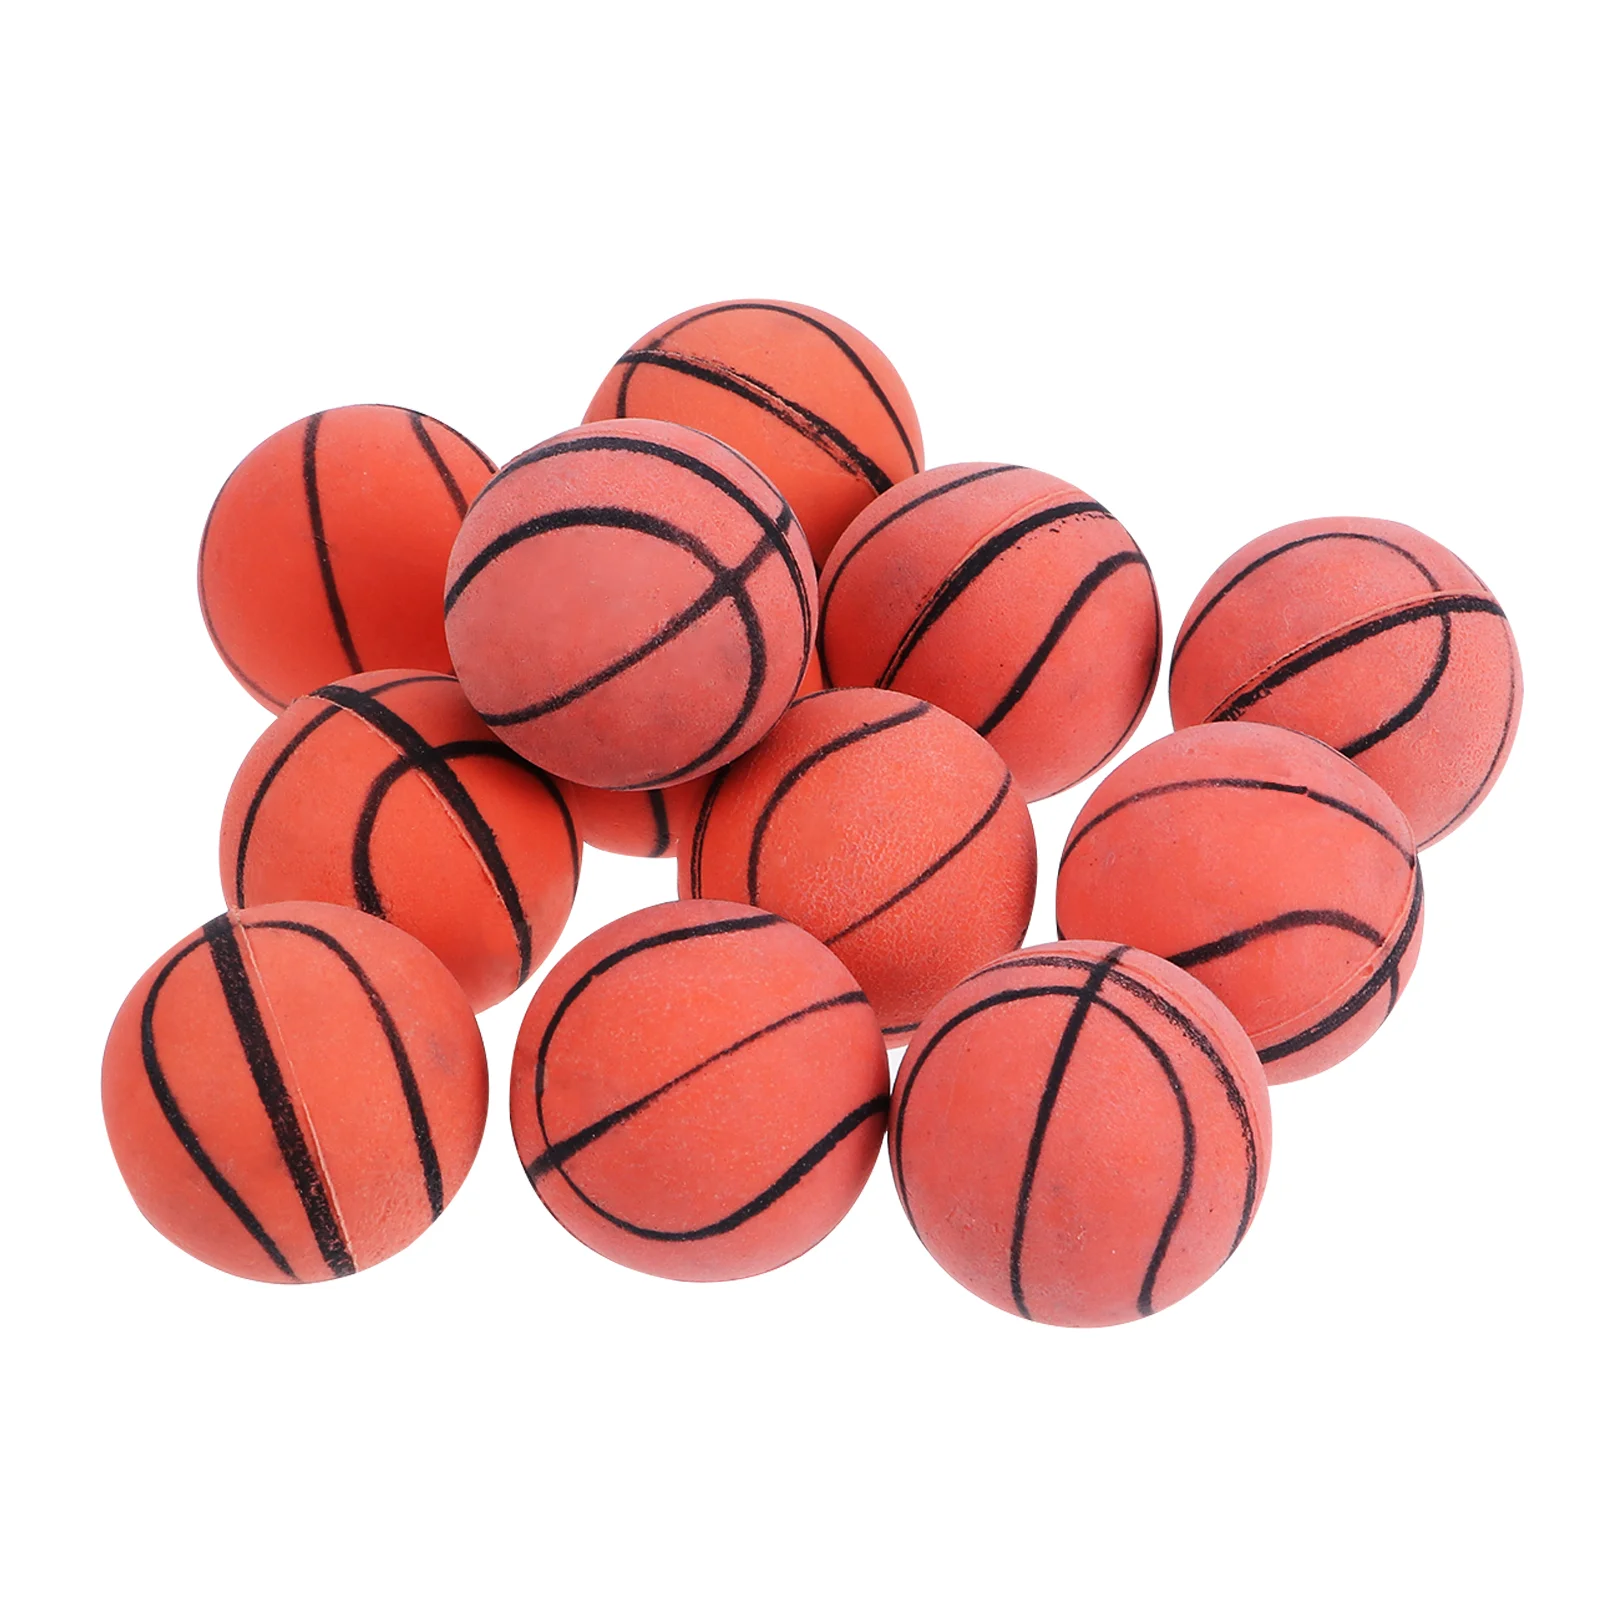 12 Pcs Mini Basketball Balls Toy Practical Children Kids Toys Bounce for Eco-friendly PVC Plaything Plastic Jumping